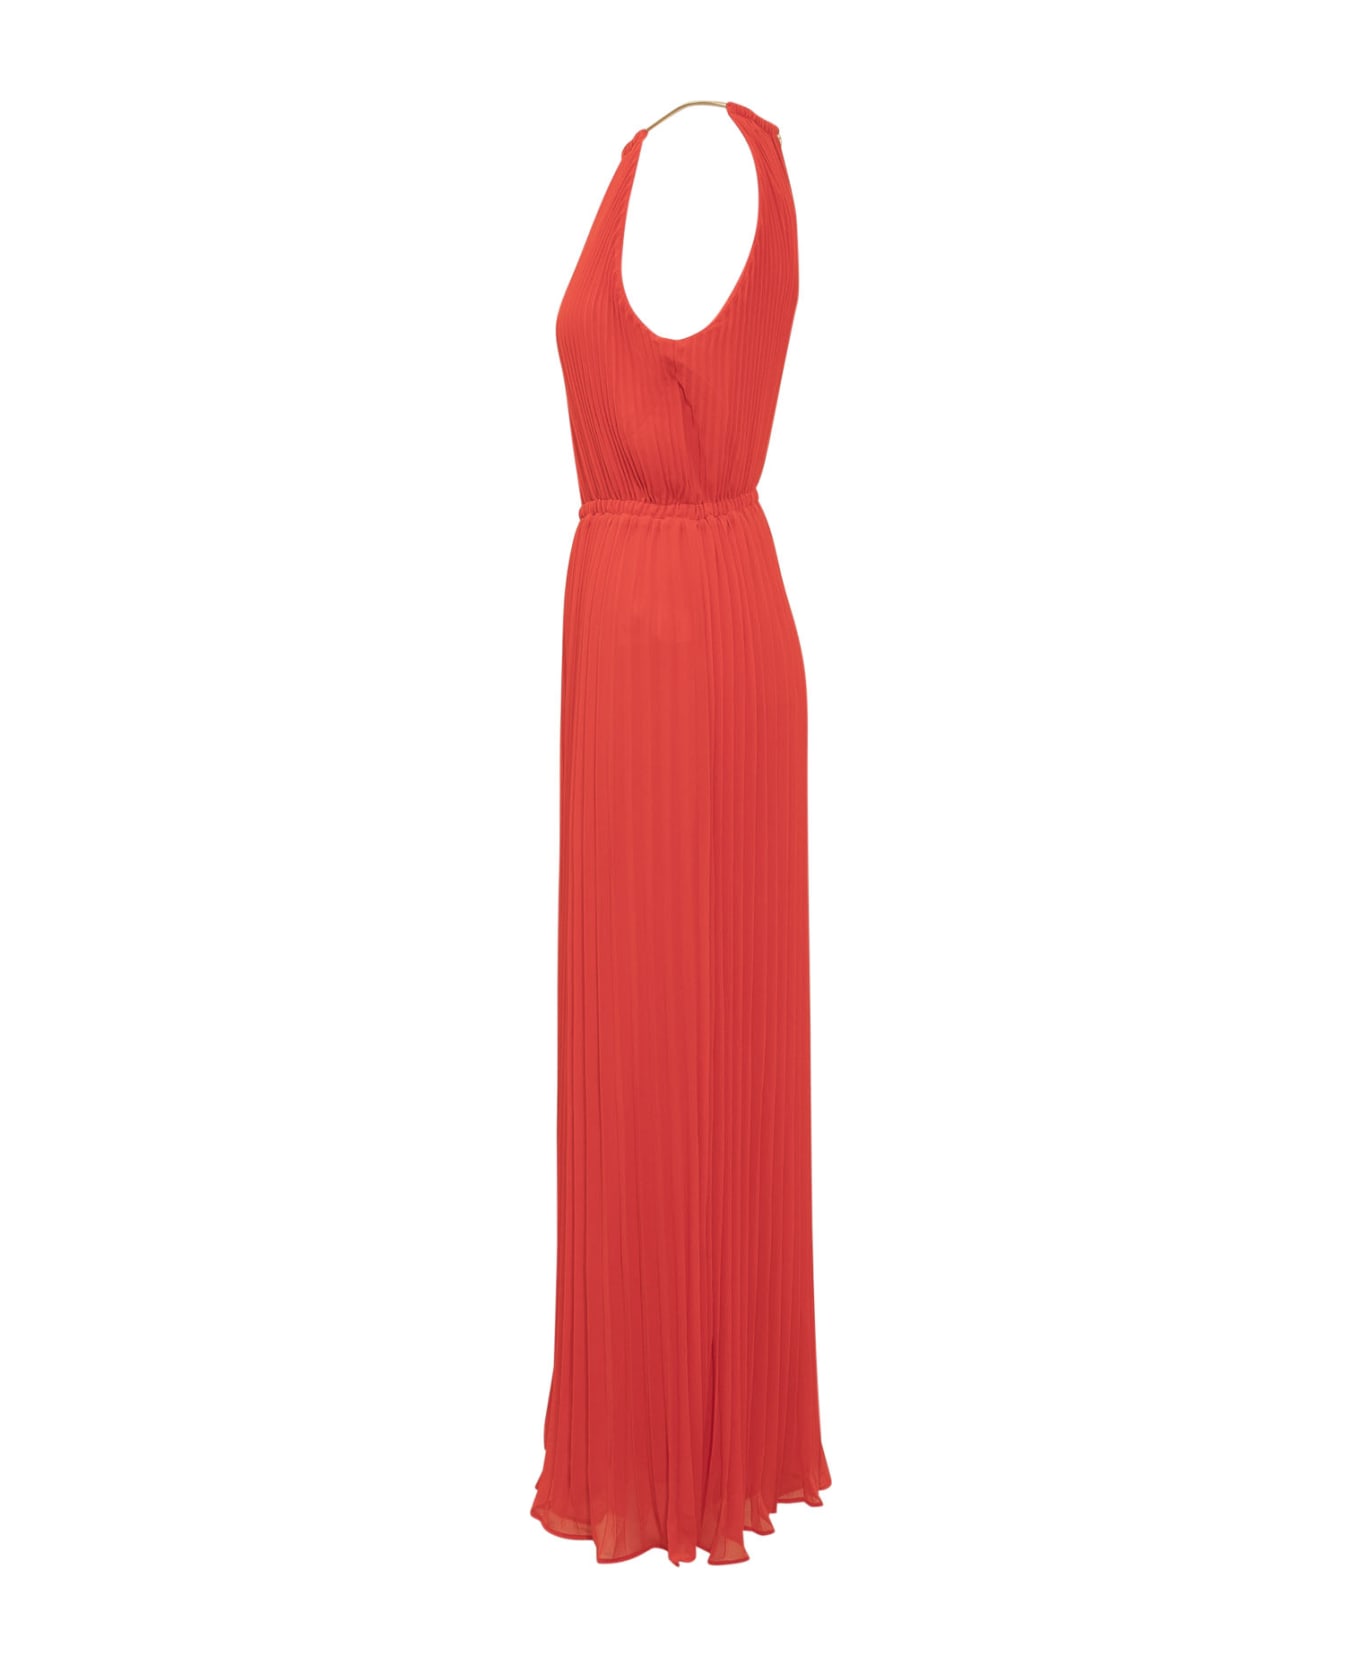 Michael Kors Collection Full Suit Dress - Sea Coral